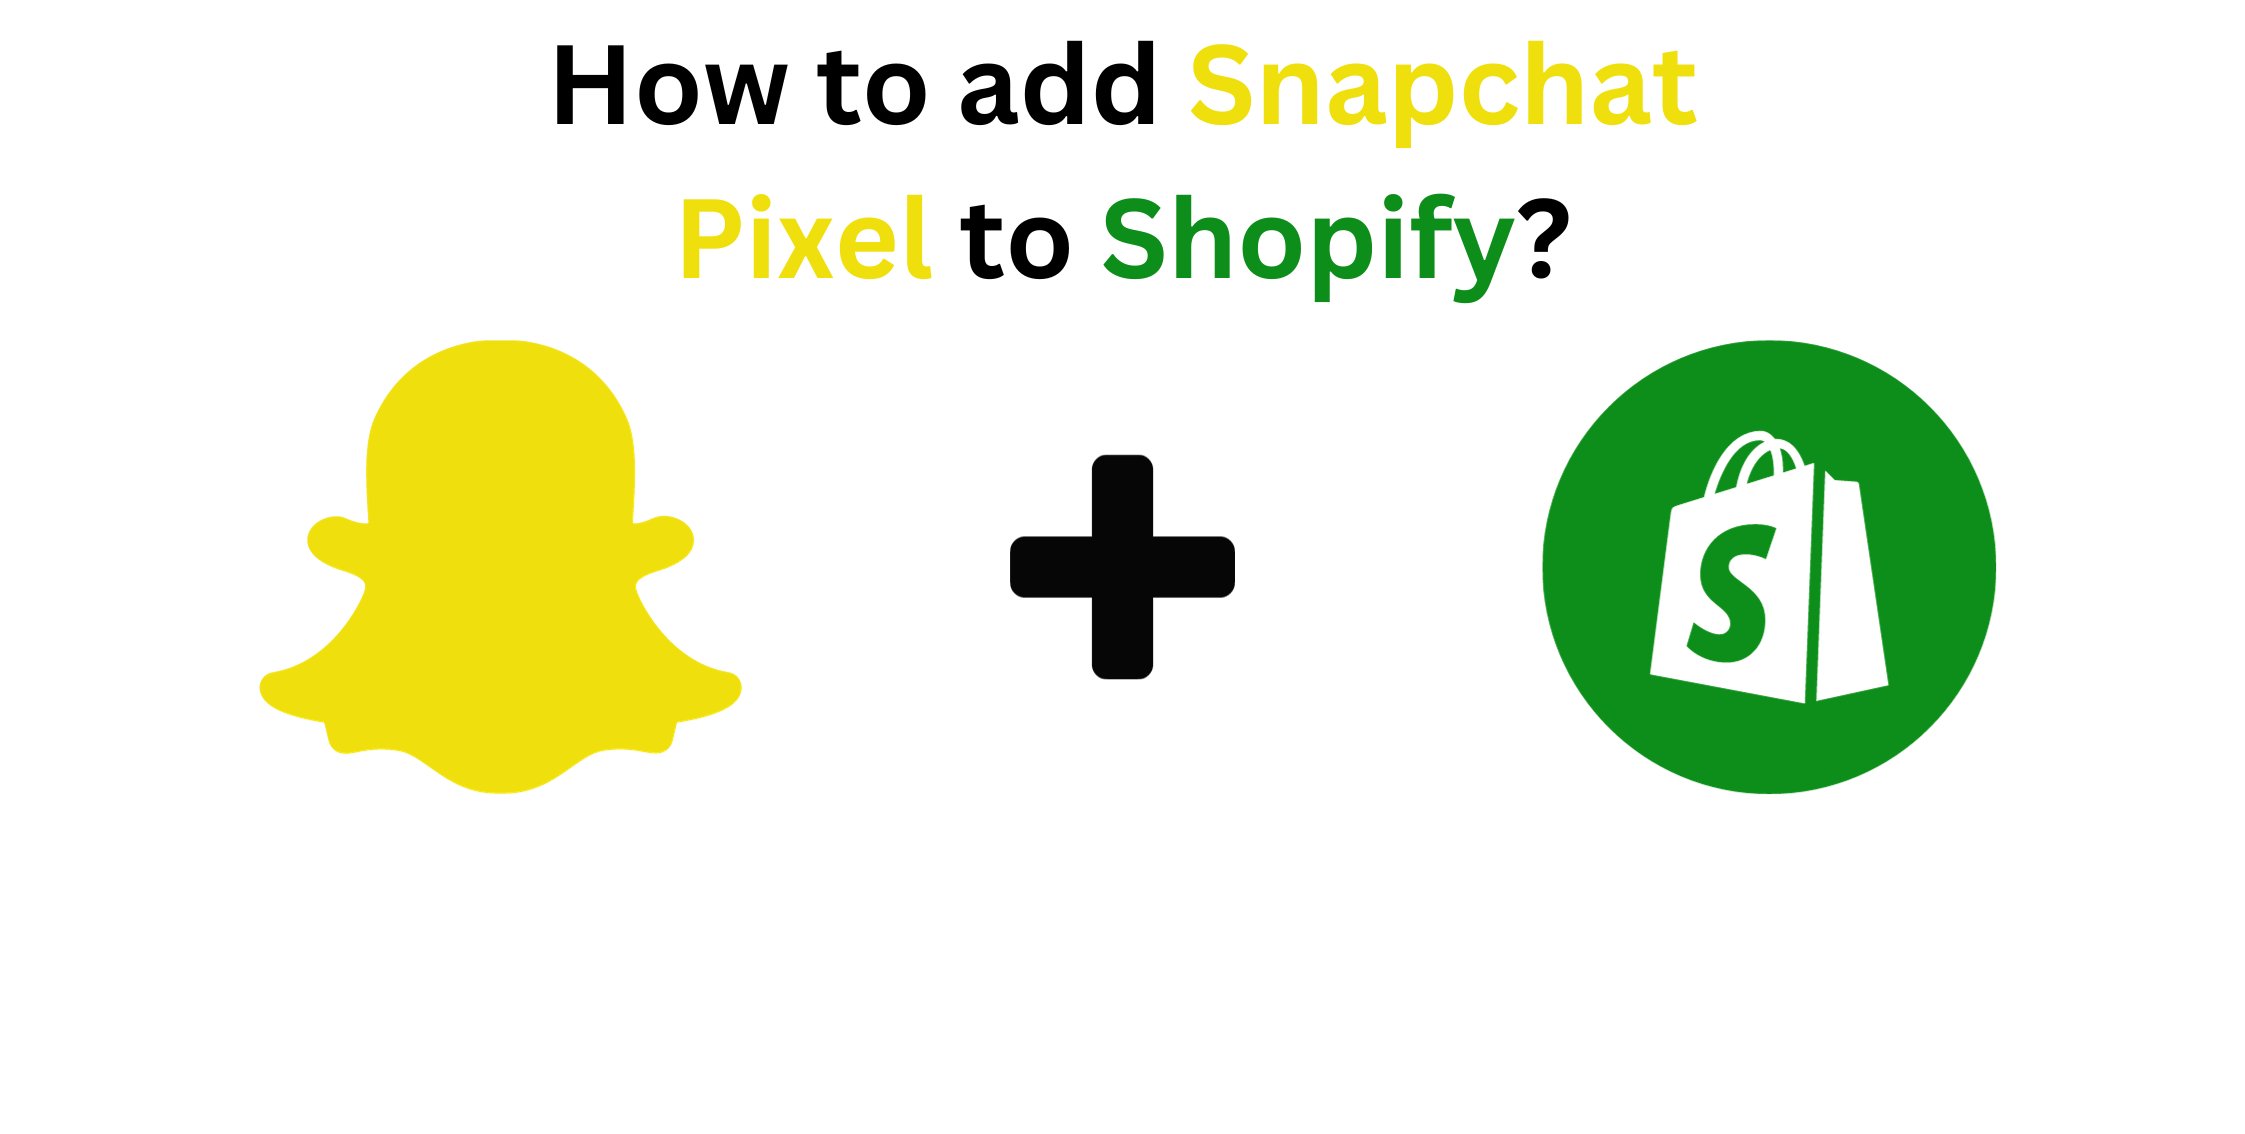 How to Add Snapchat Pixel to Shopify?